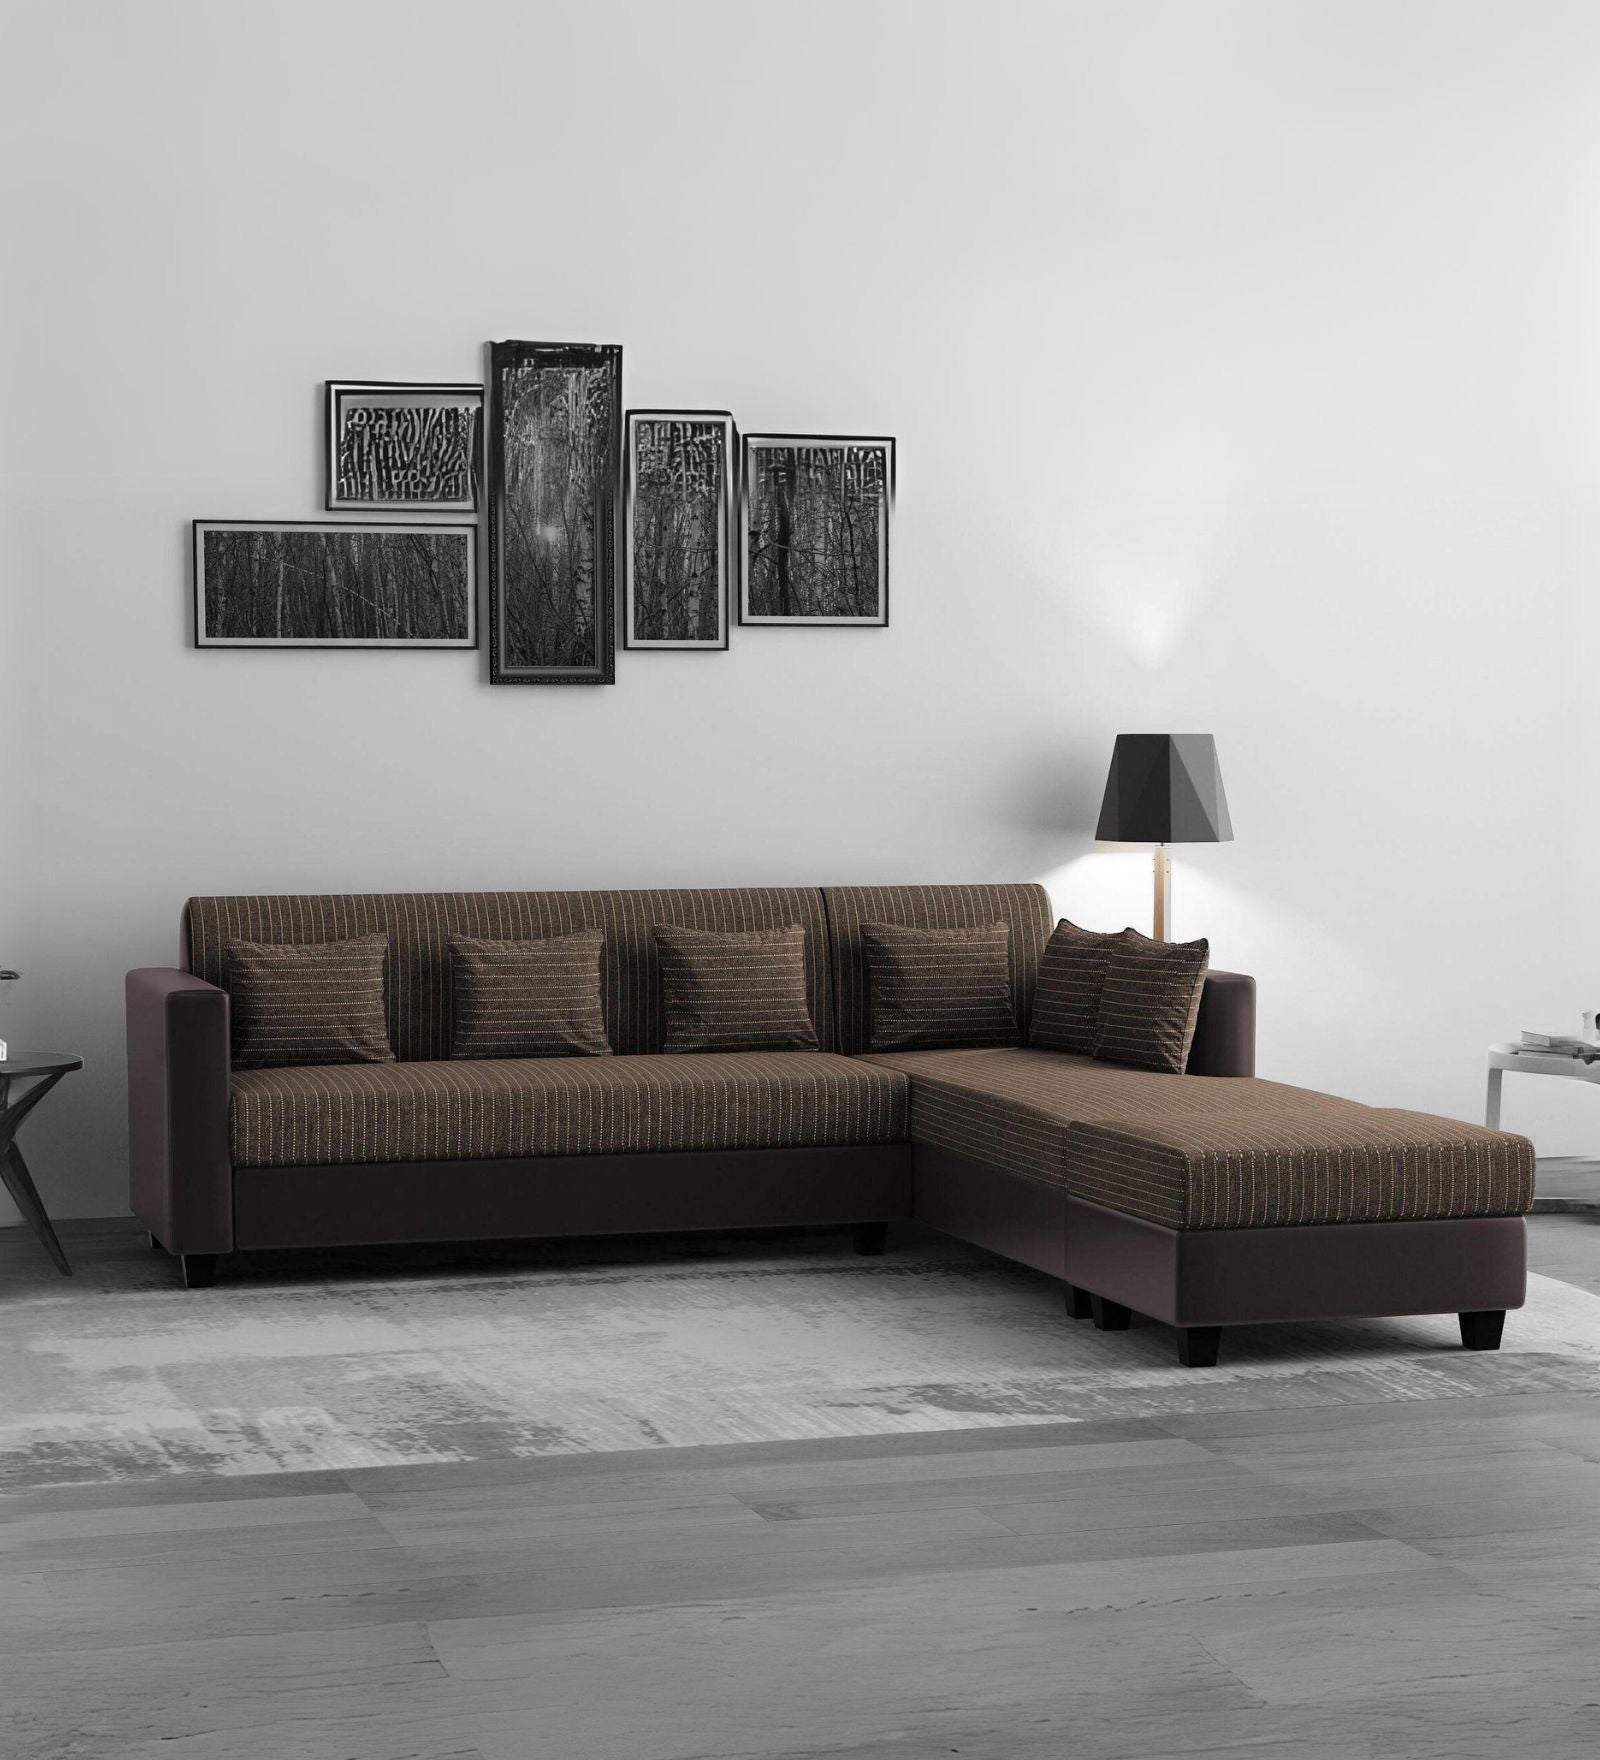 Baley Fabric LHS Sectional Sofa (3 + Lounger) In Lama Brown Colour